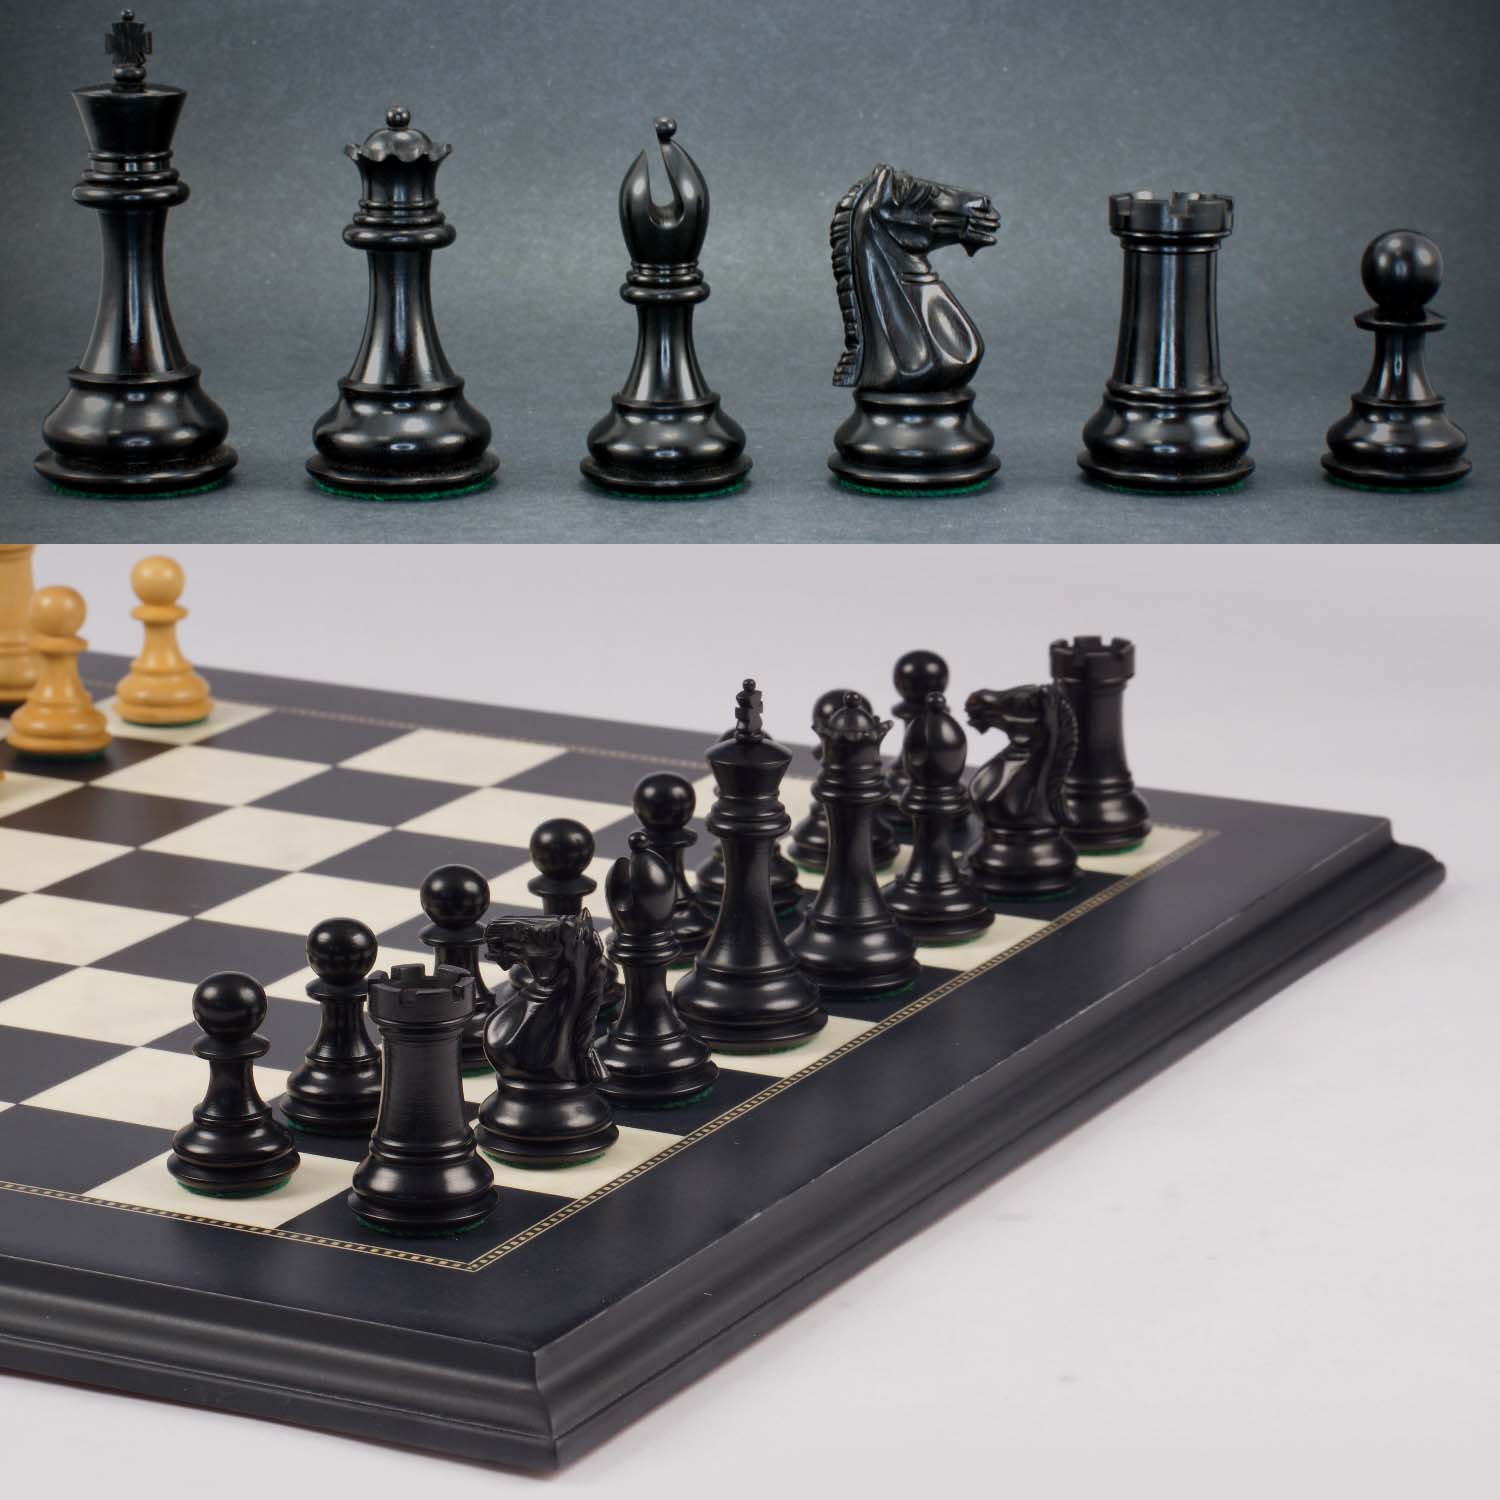 23 Presidential Style Chess Board